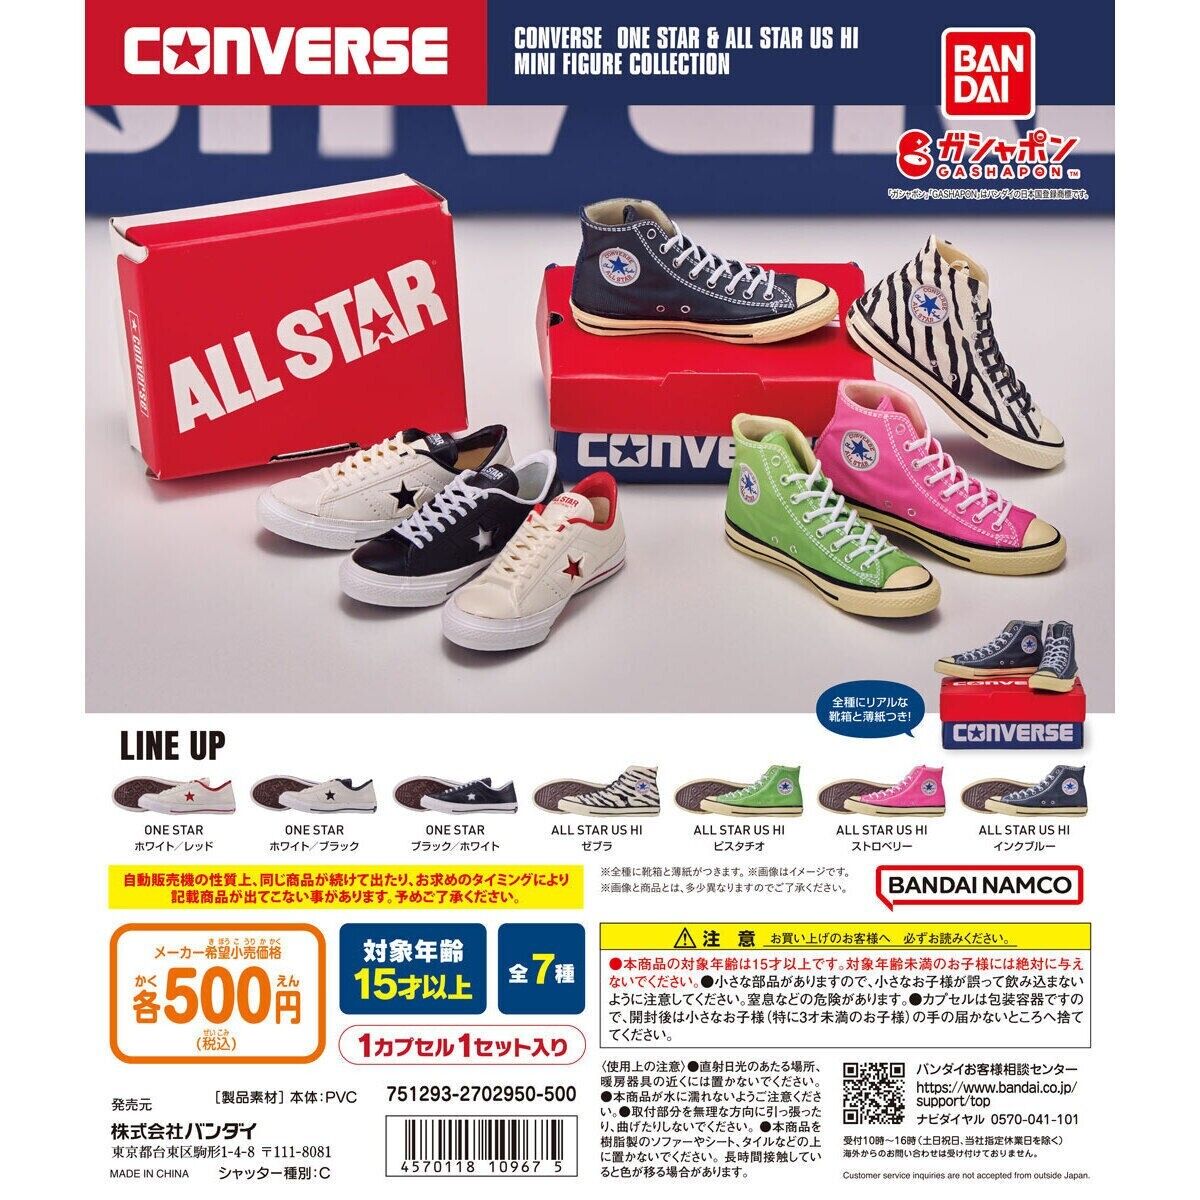 CONVERSE ONE STAR & ALL STAR US HI MINI FIGURE COLLECTION Complete with all 7